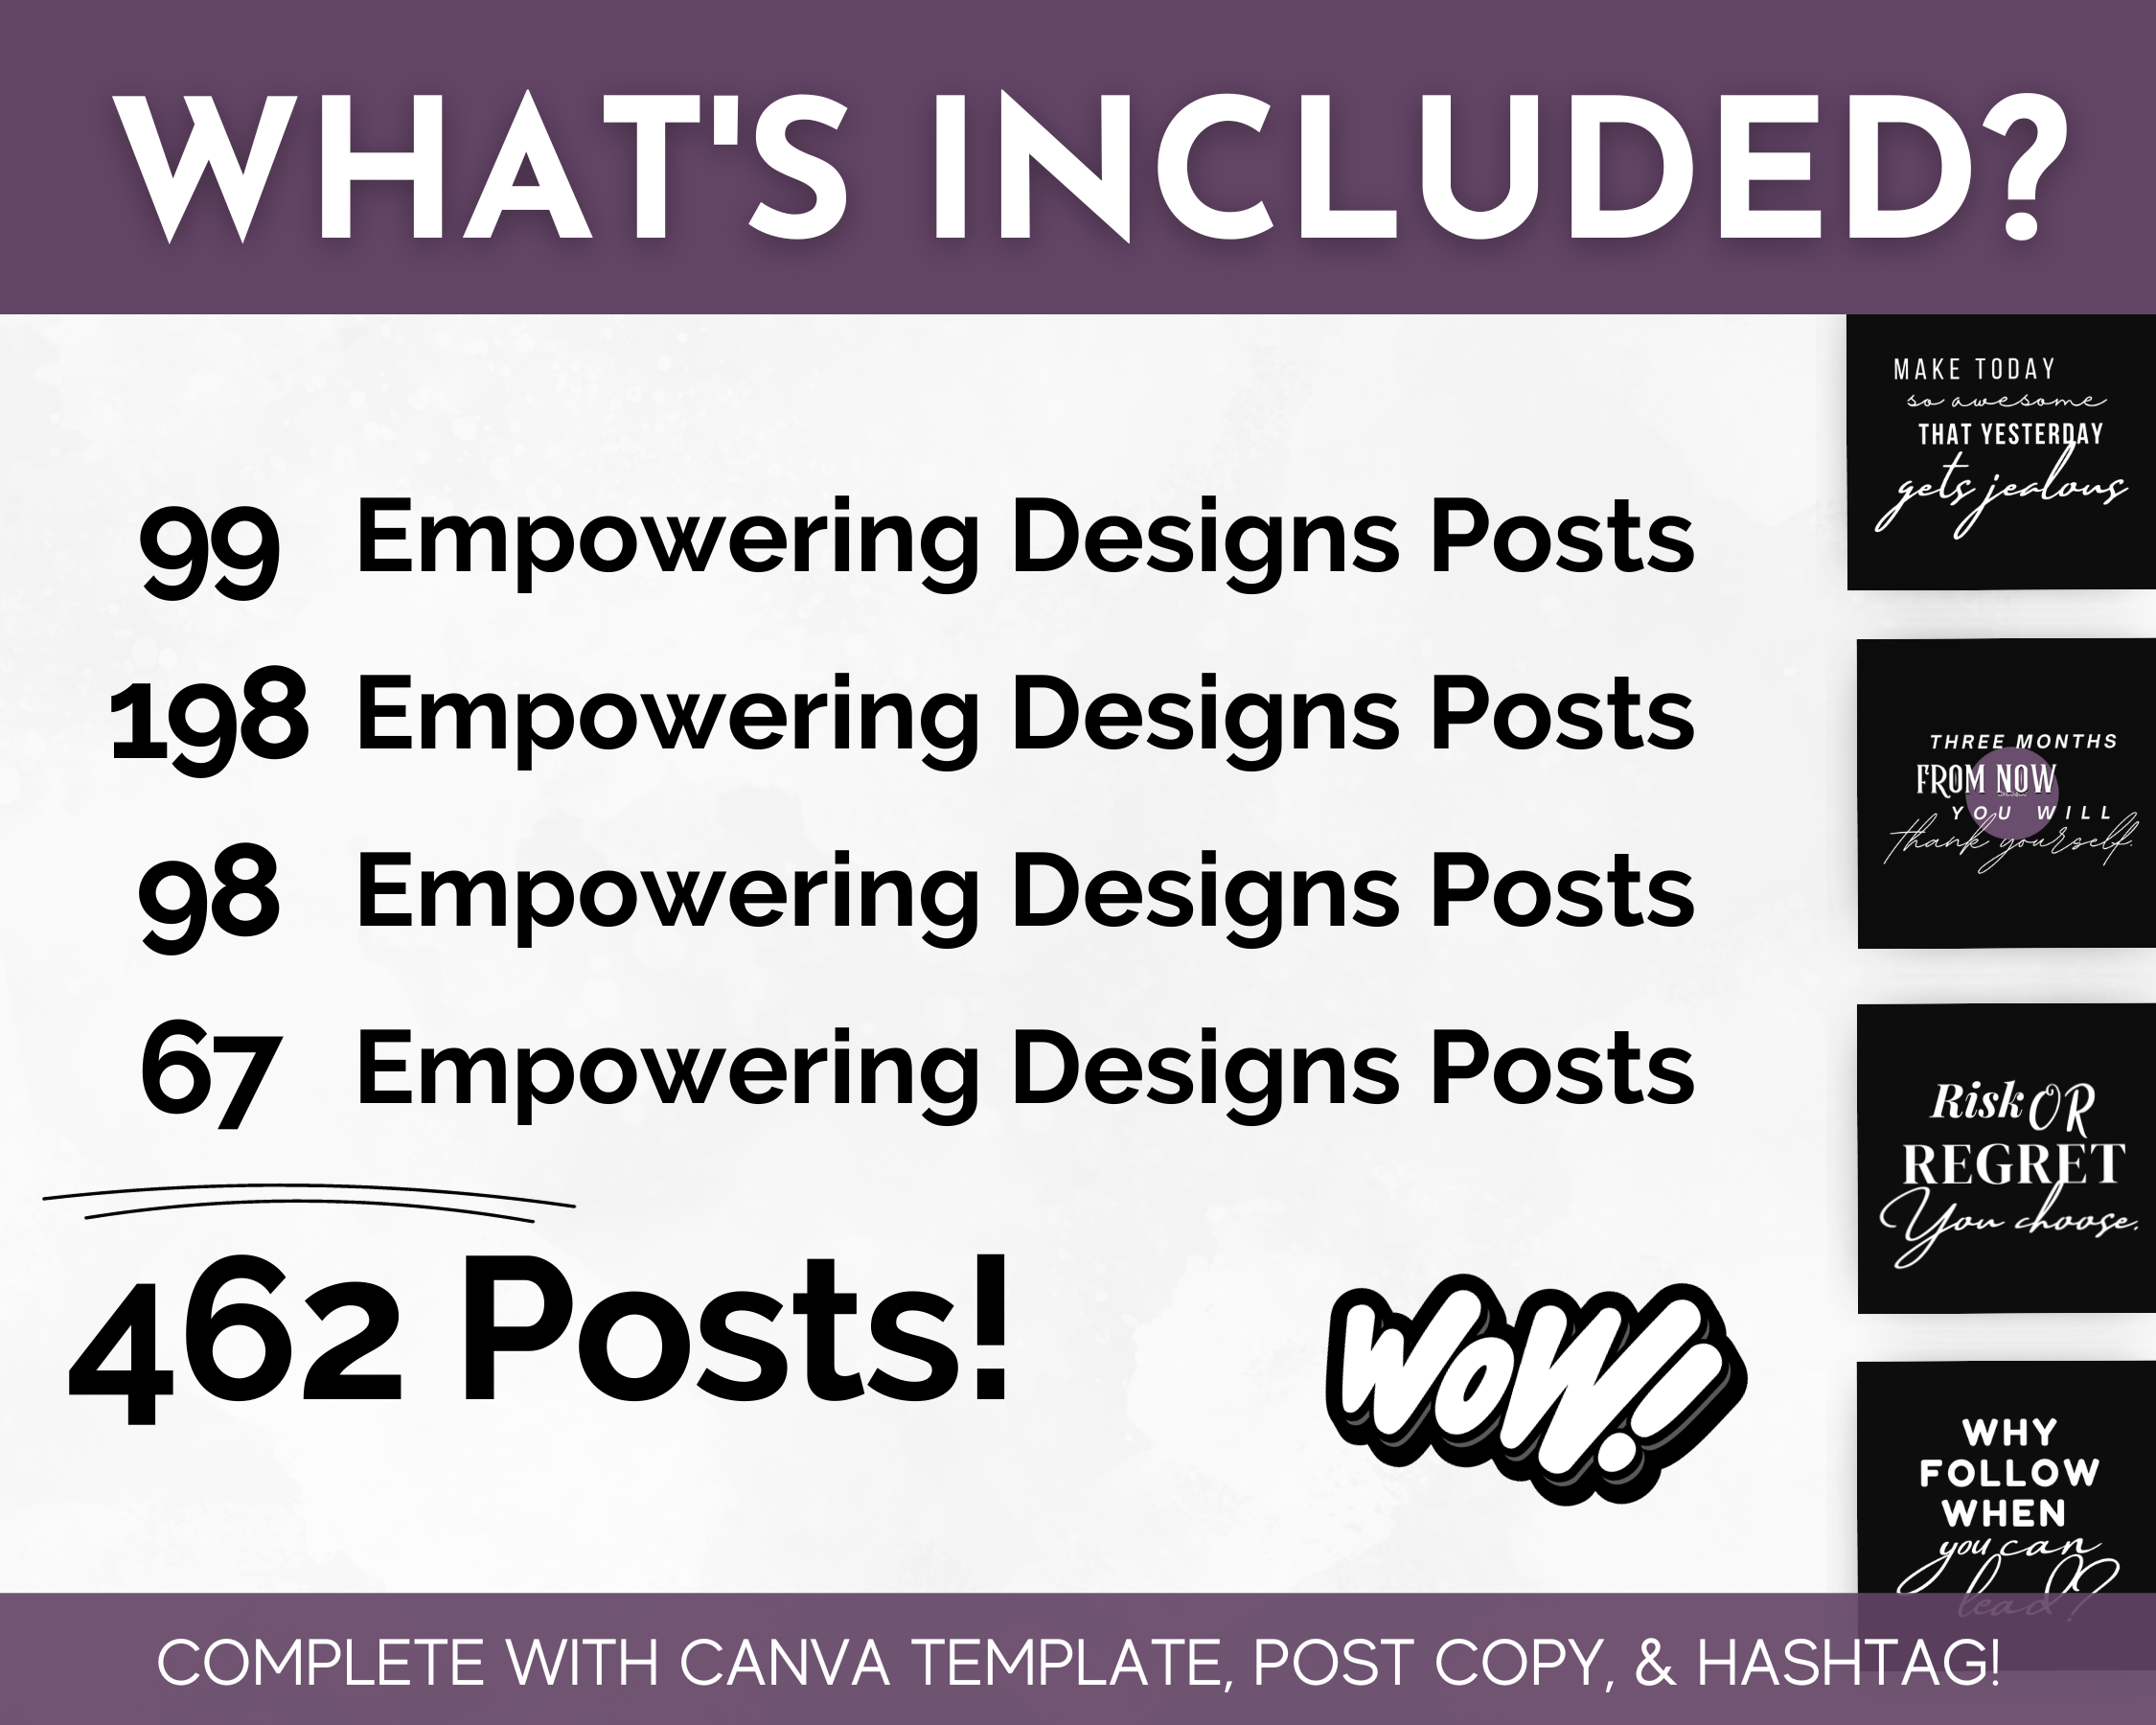 This post focuses on the Empowering "Girl Boss Style" Social Media Post Bundle with Canva Templates by Socially Inclined. The content also incorporates SEO keywords.